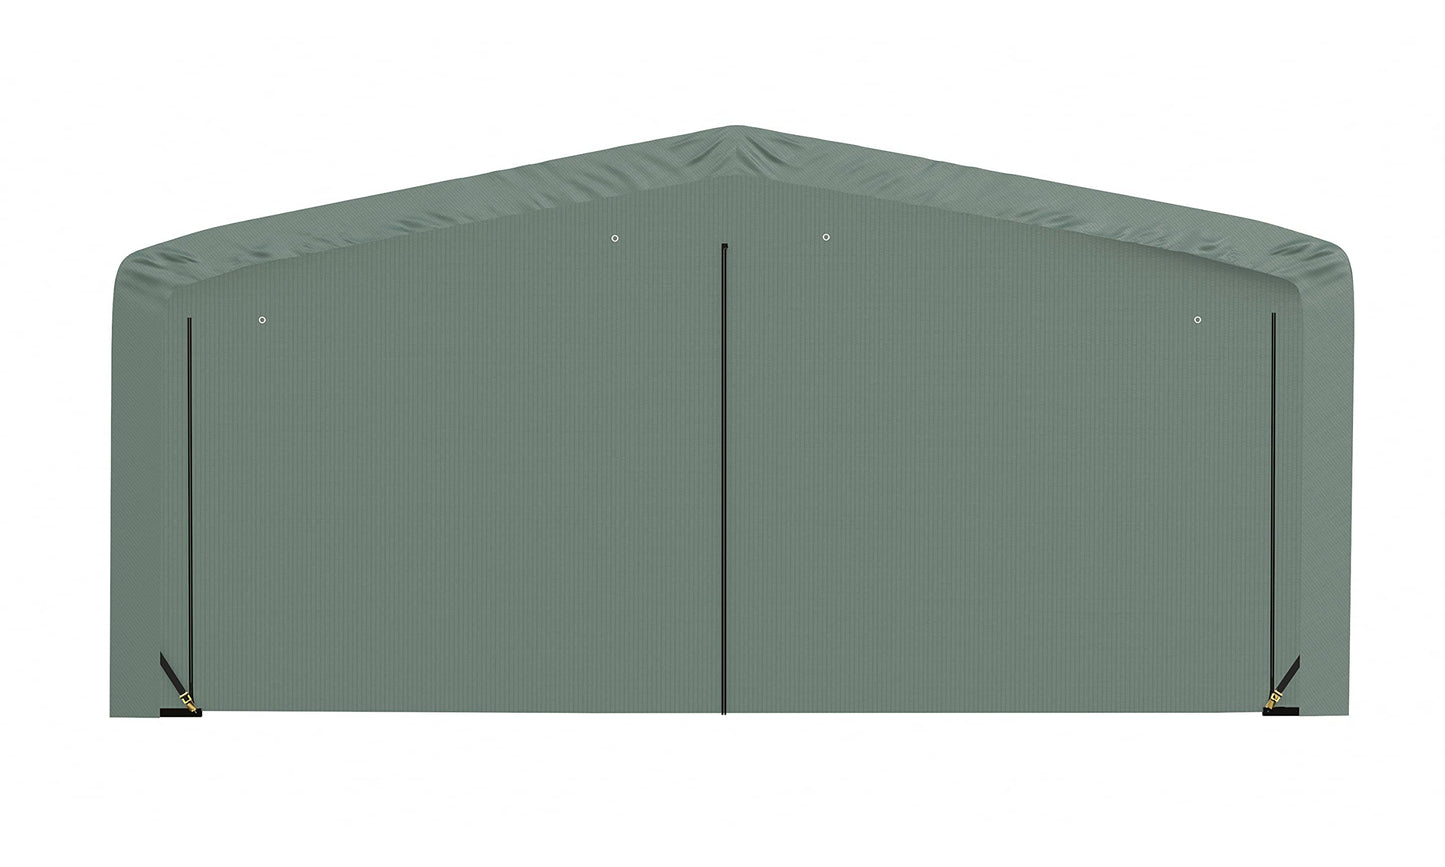 ShelterLogic ShelterTube Garage & Storage Shelter, 20' x 32' x 10' Heavy-Duty Steel Frame Wind and Snow-Load Rated Enclosure, Green 20' x 32' x 10'